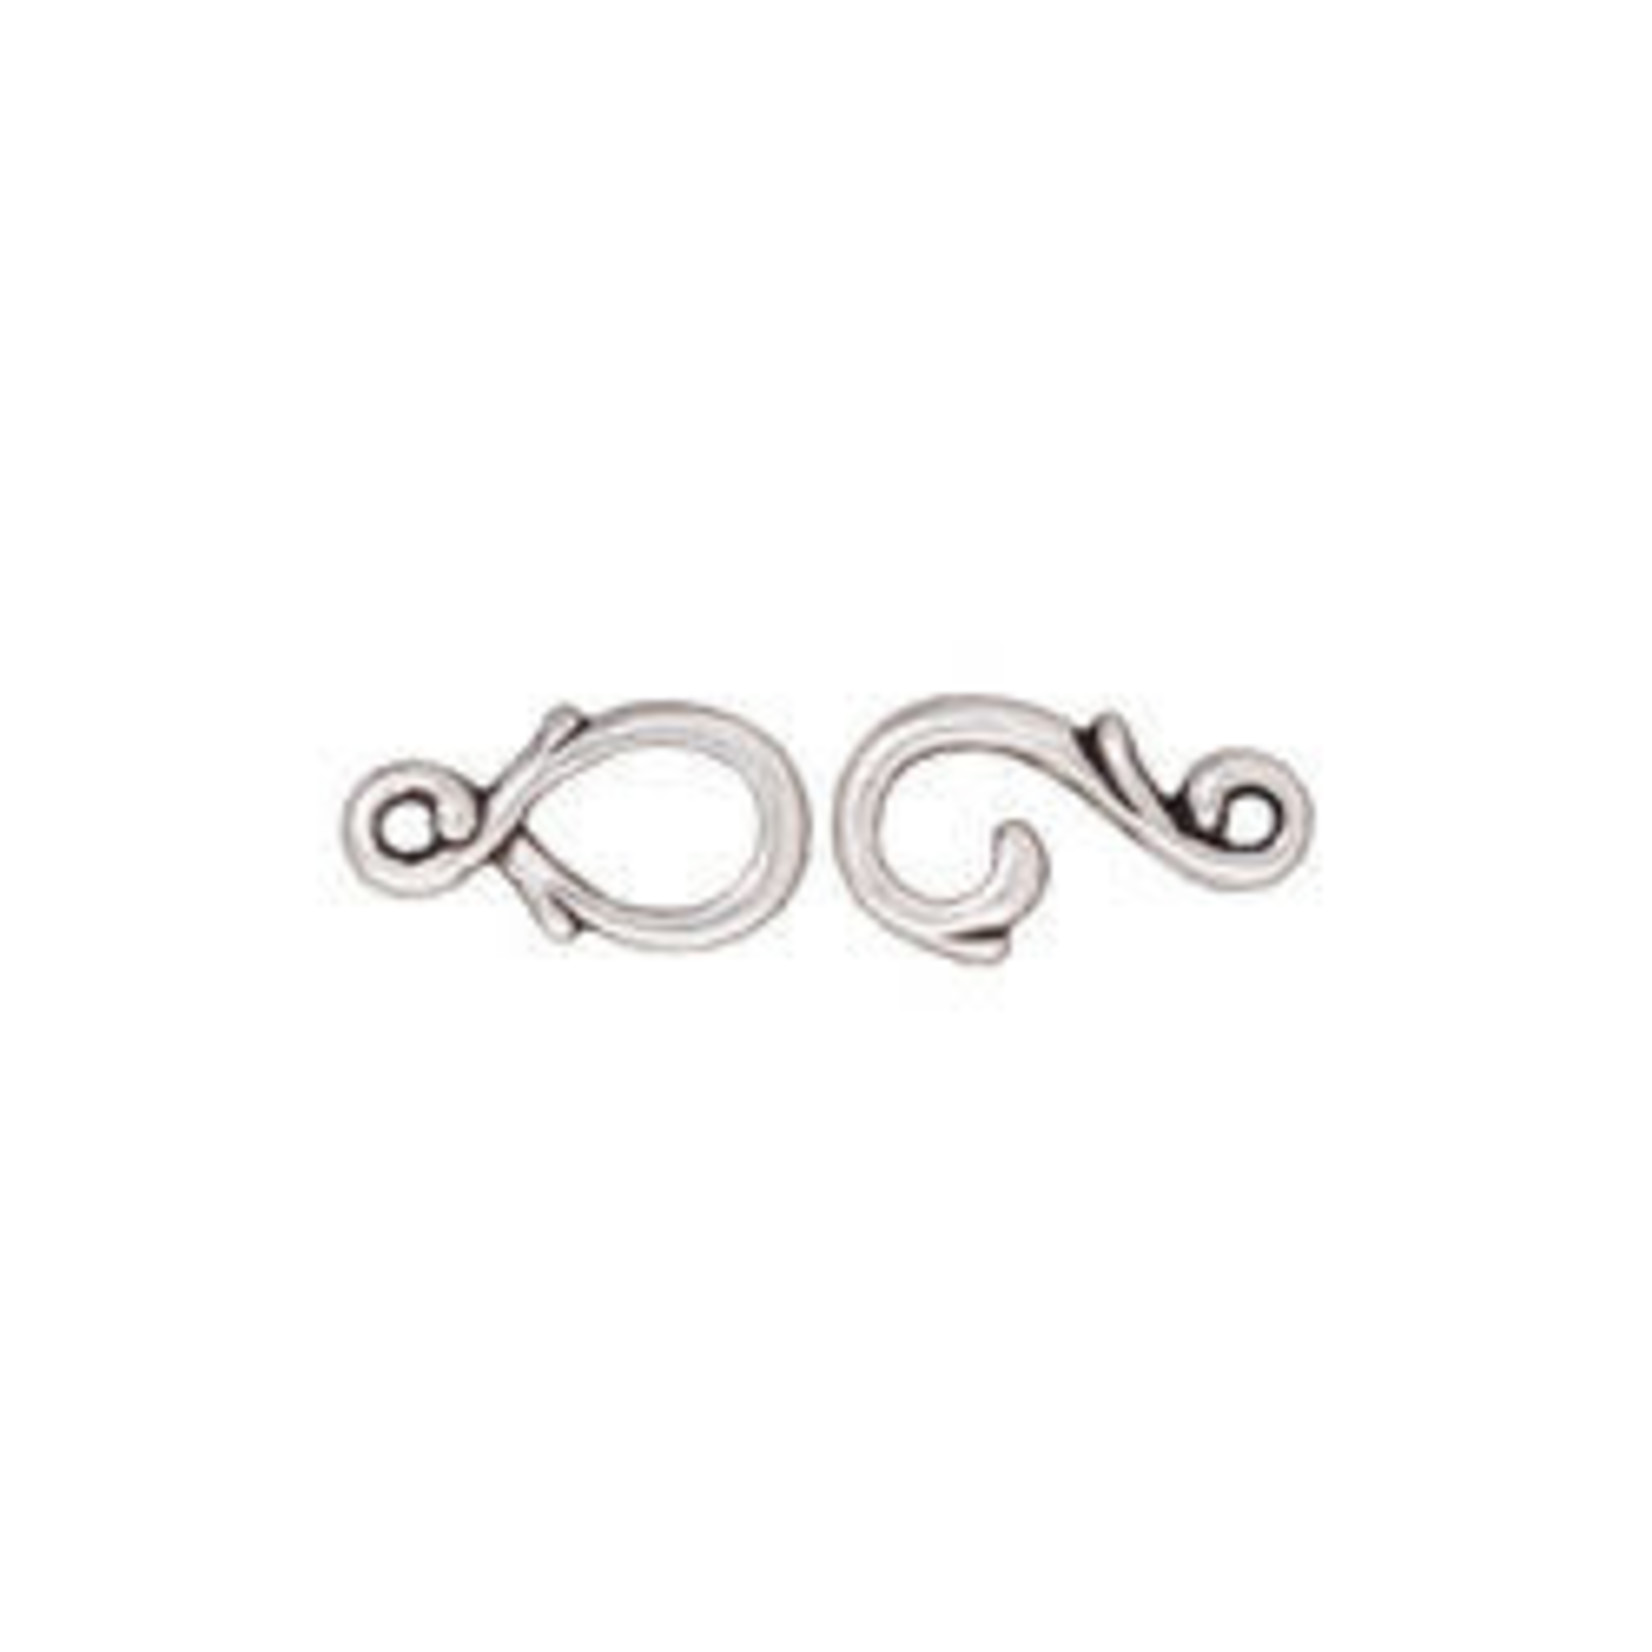 TierraCast Tierracast Antique Silver Plated Vine Hook and Eye Clasp Set